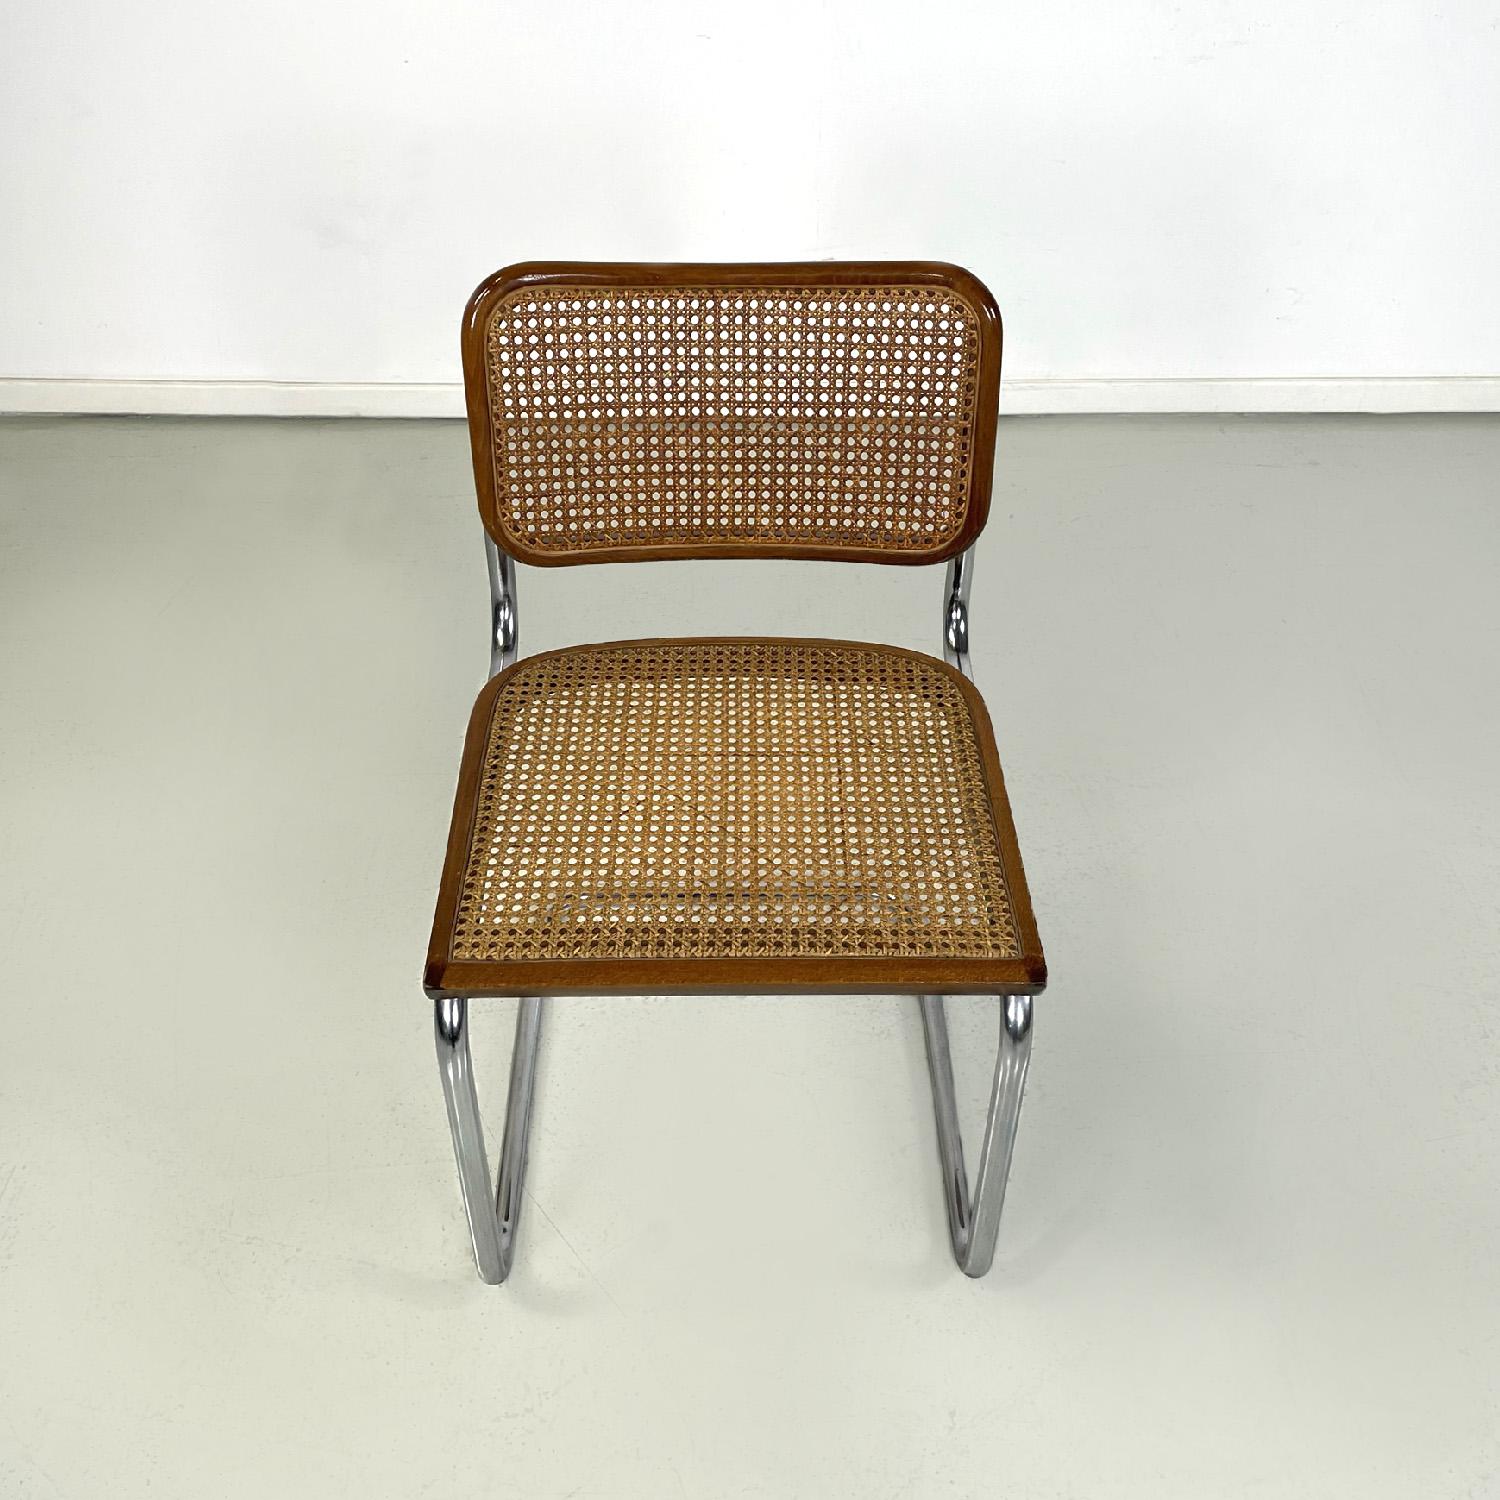 Metal Italian mid-century modern chairs in wood straw and steel, 1960s